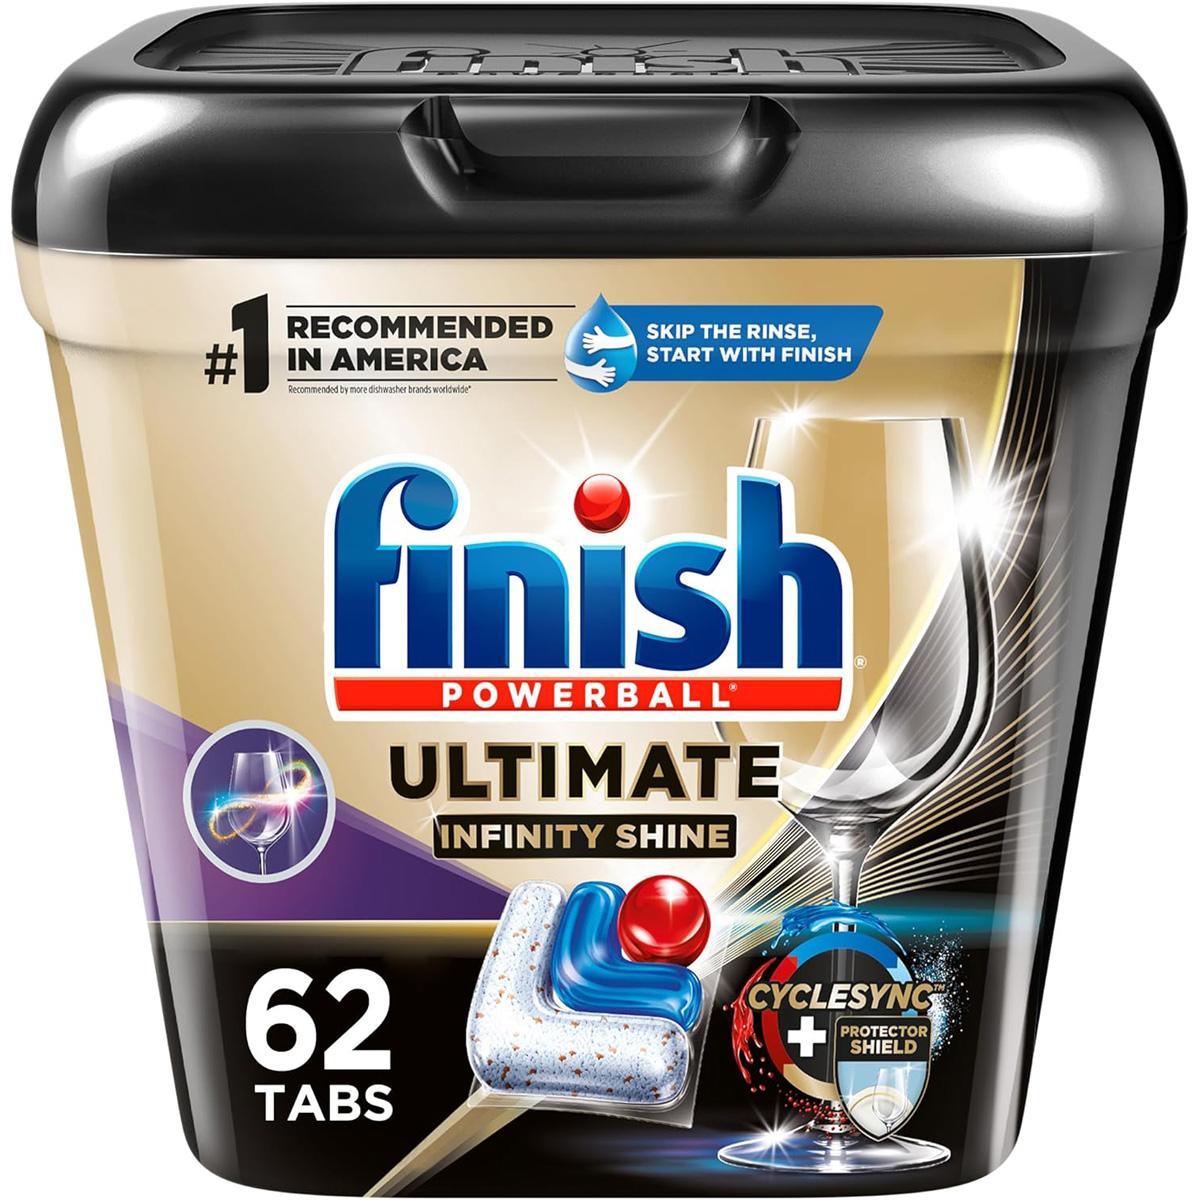 Finish Ultimate Plus Infinity Shine Dishwasher Detergent 62 Pack for $14.47 Shipped